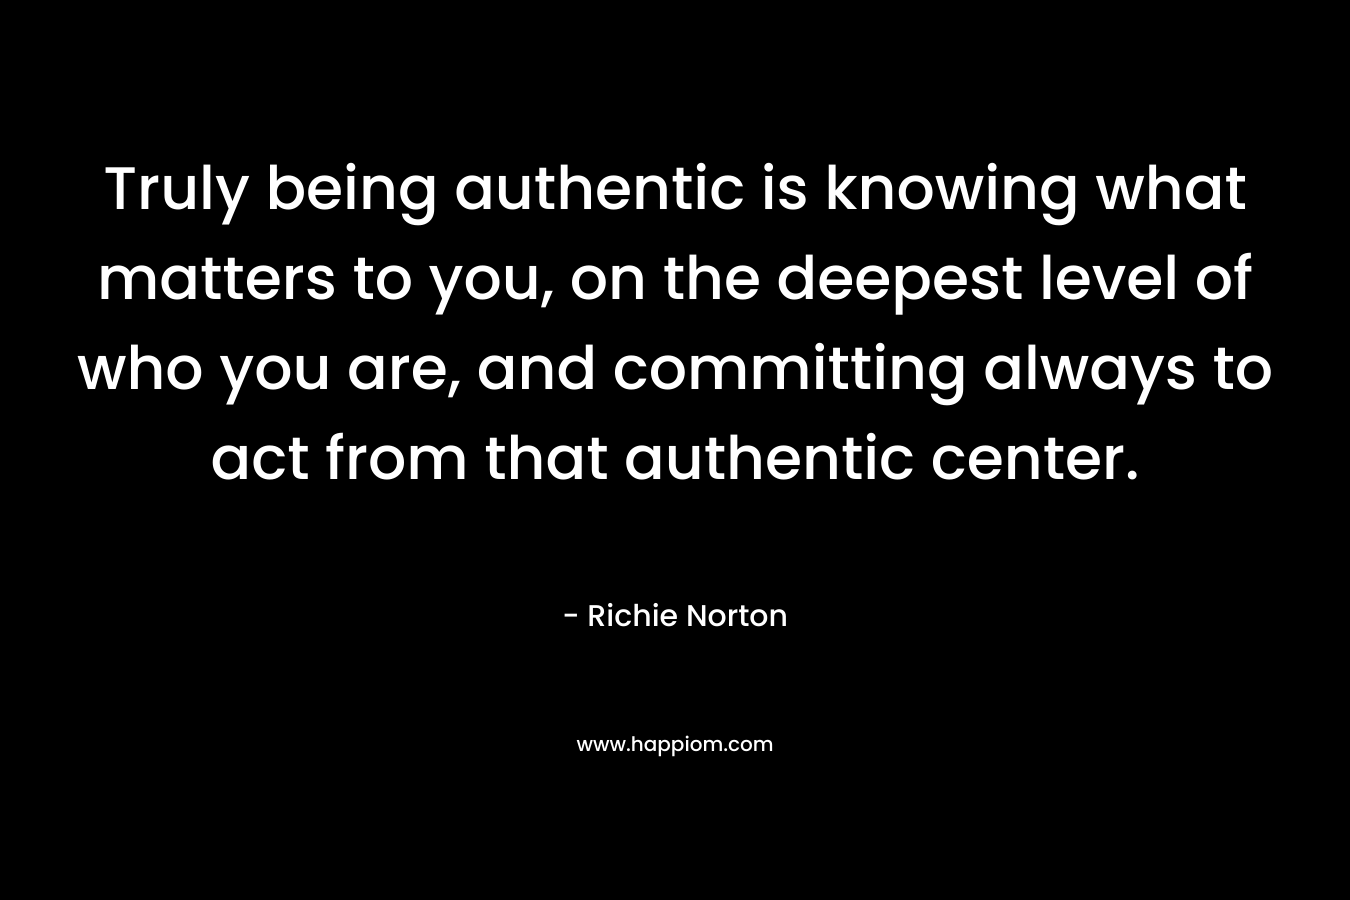 Truly being authentic is knowing what matters to you, on the deepest level of who you are, and committing always to act from that authentic center.